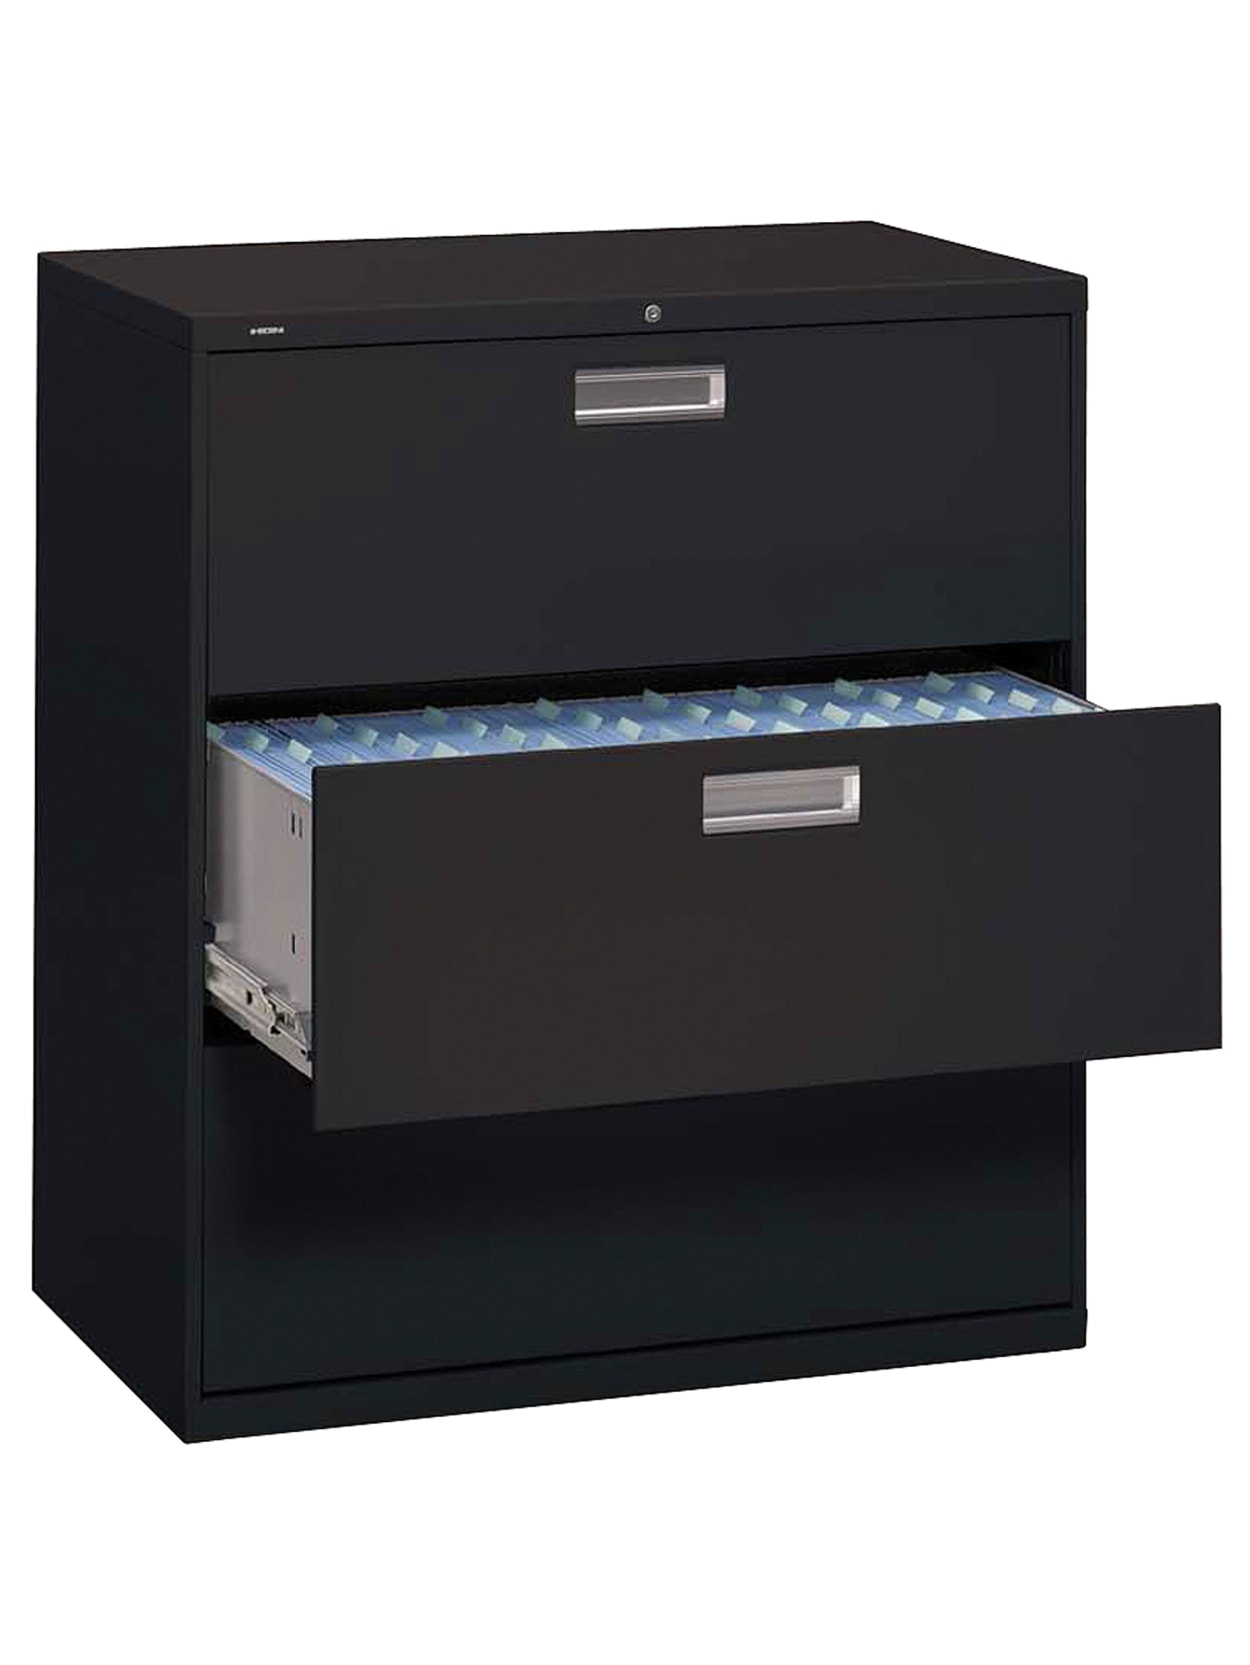 Filing Organizer Cabinet Office Secure Storage Lockable Lid A4 Size Black Small